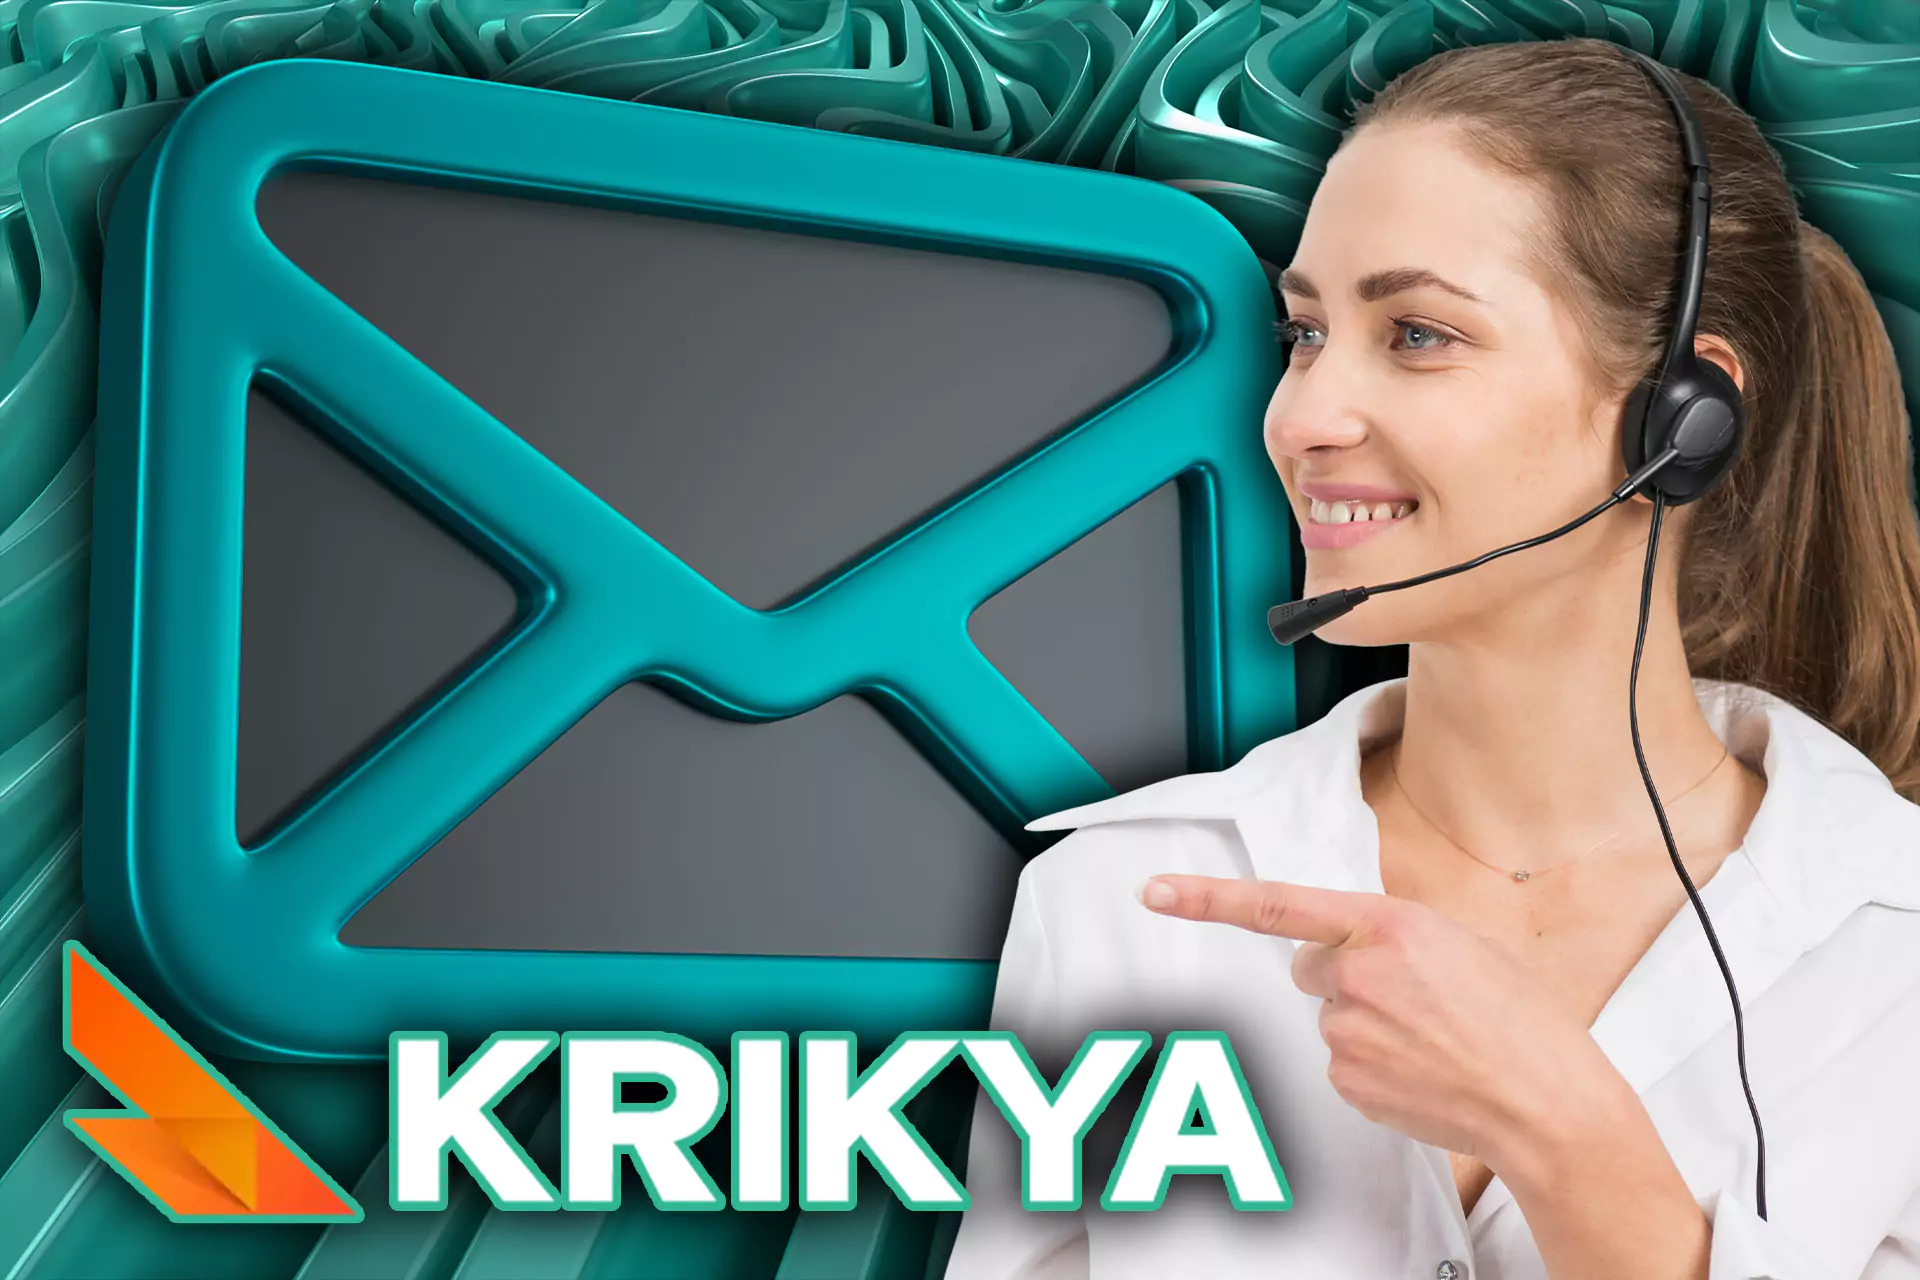 Write help request directly on Krikya email.